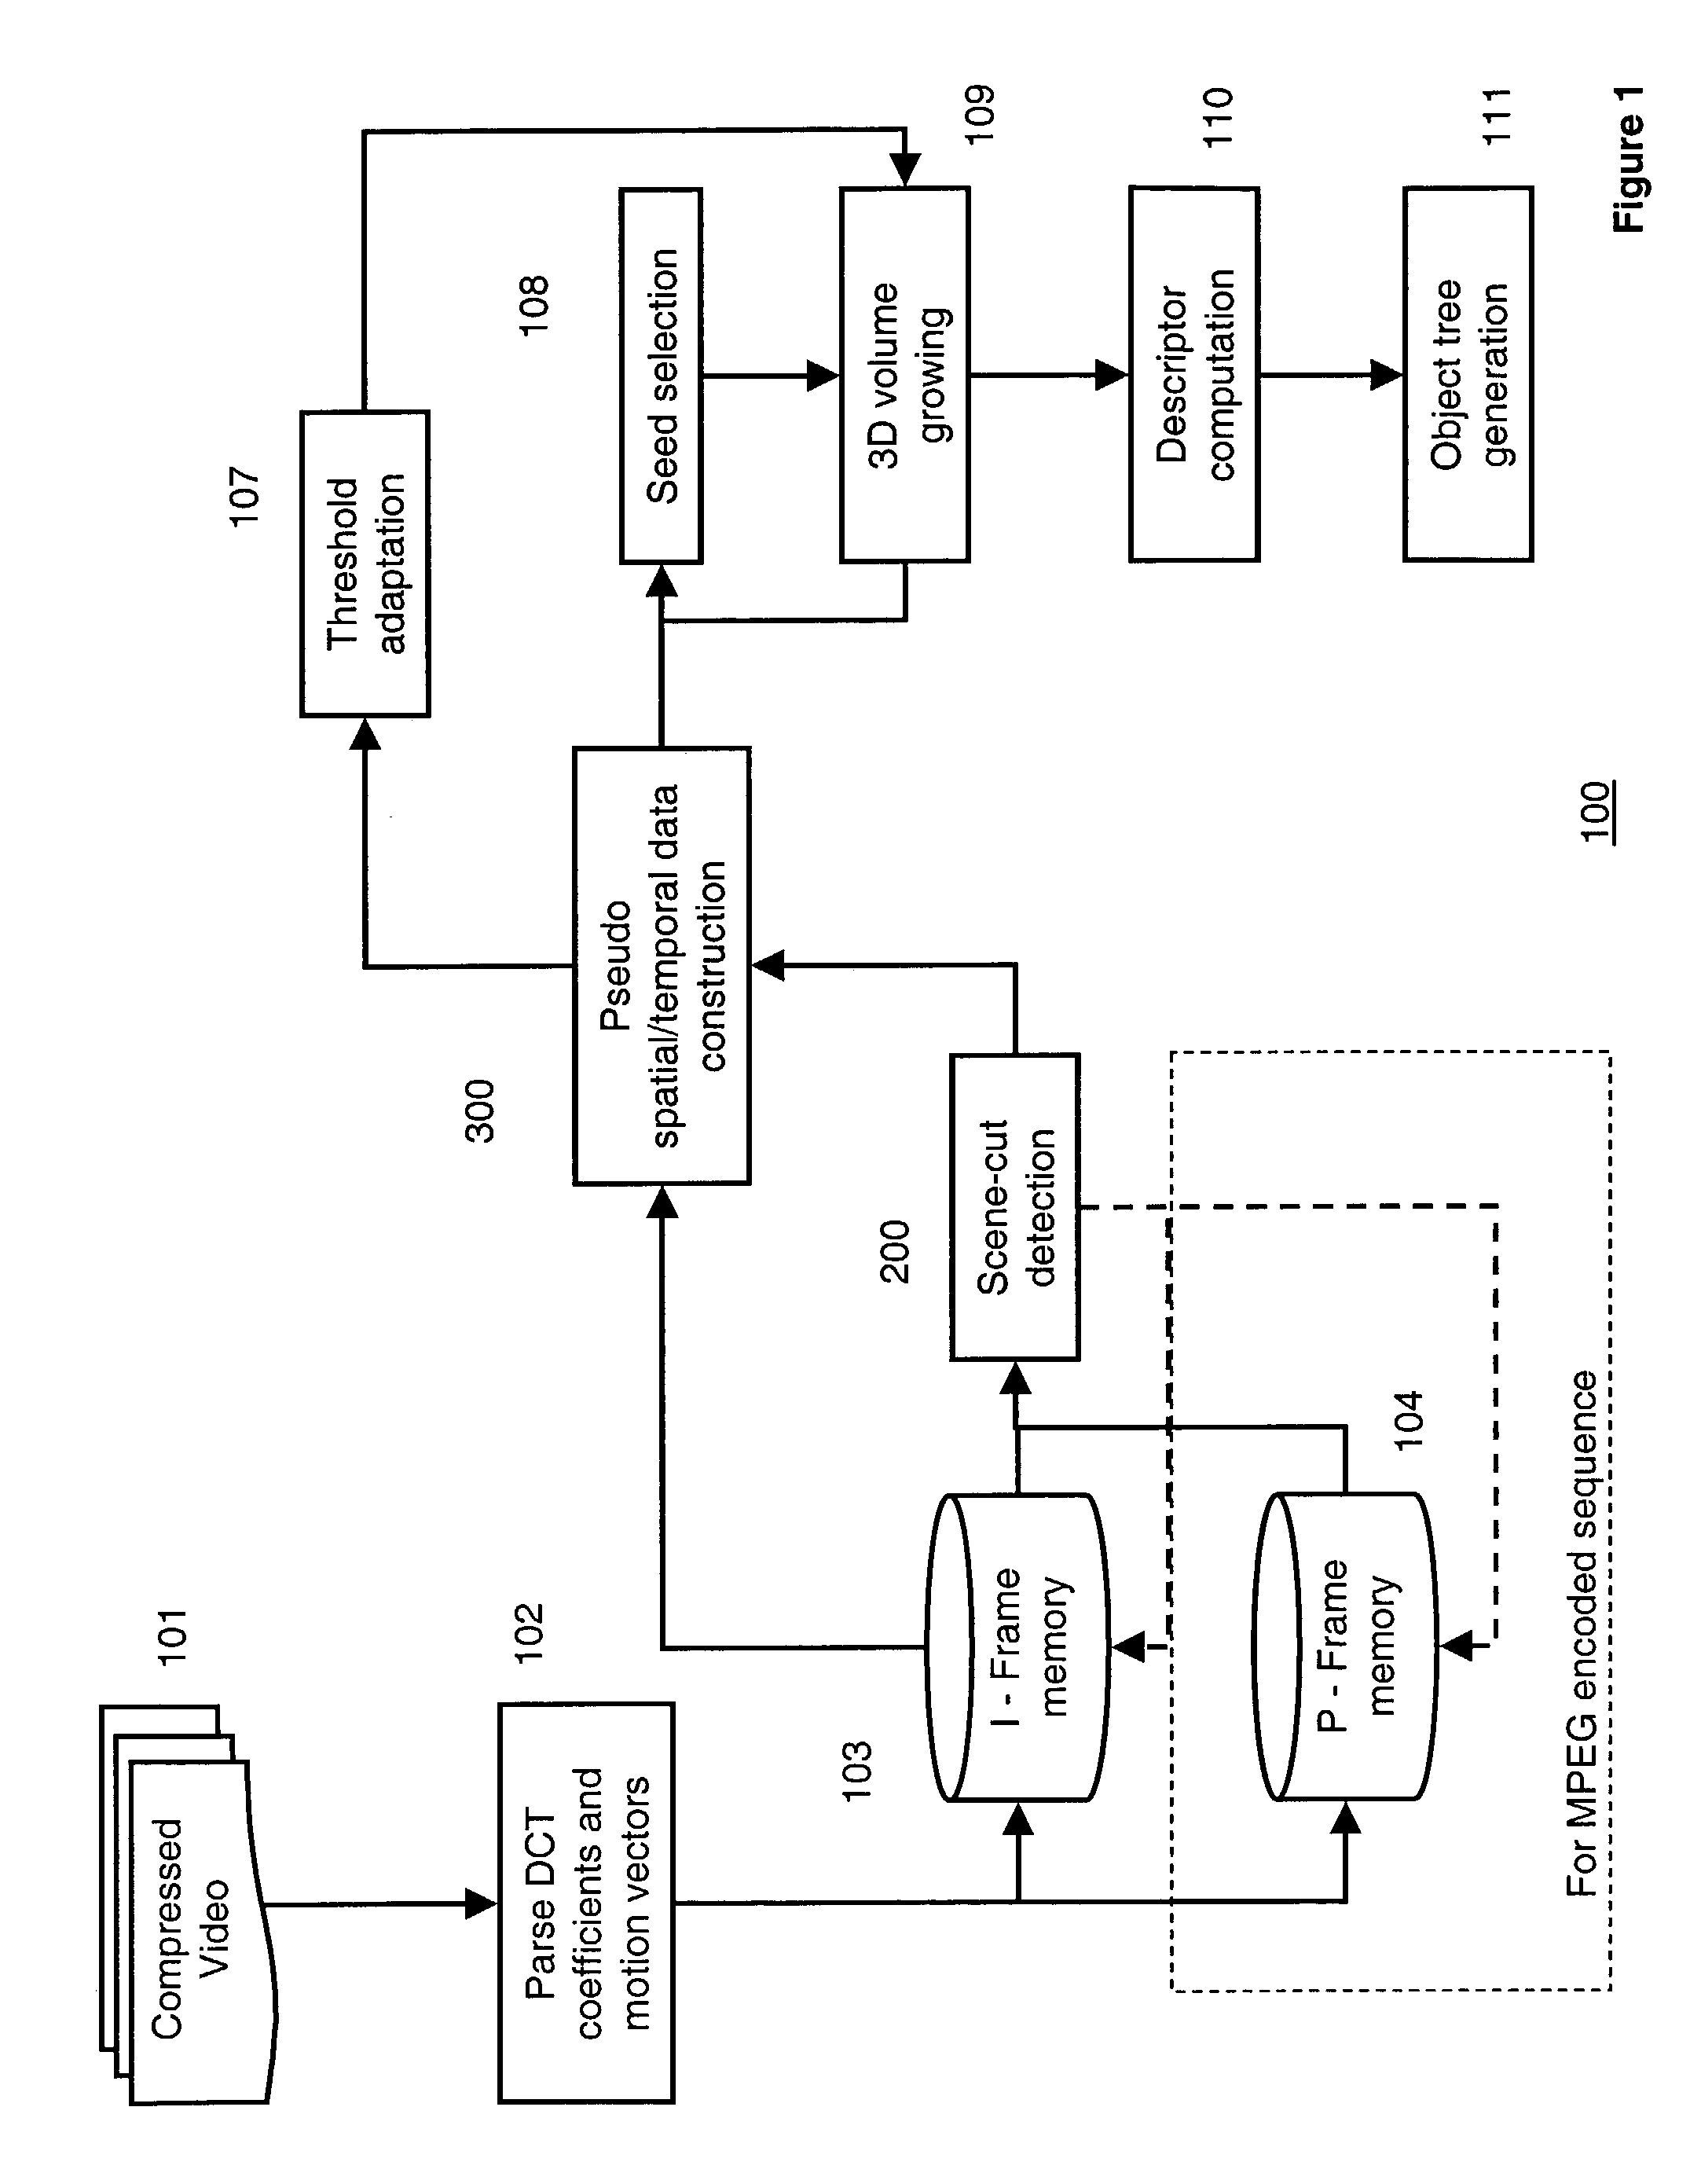 Method for segmenting 3D objects from compressed videos